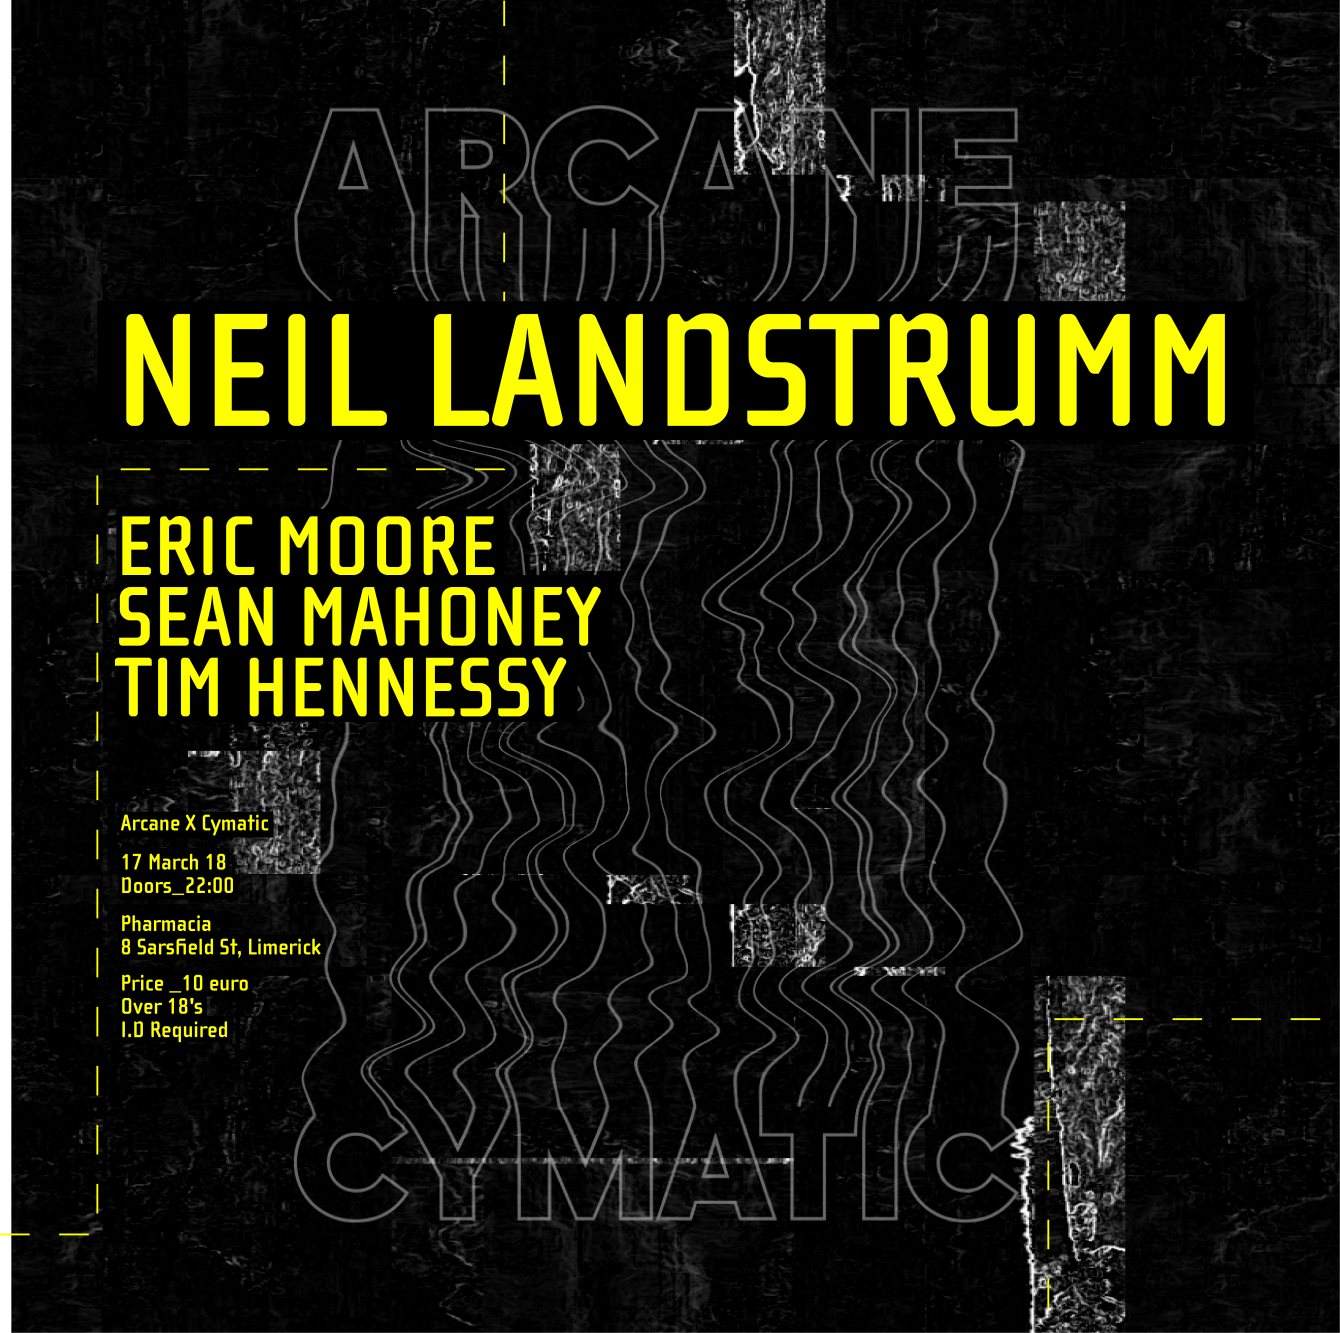 Arcane x Cymatic Paddy's Day with Neil Landstrumm / Eric Moore / Sean Mahoney / Tim Henne - フライヤー表